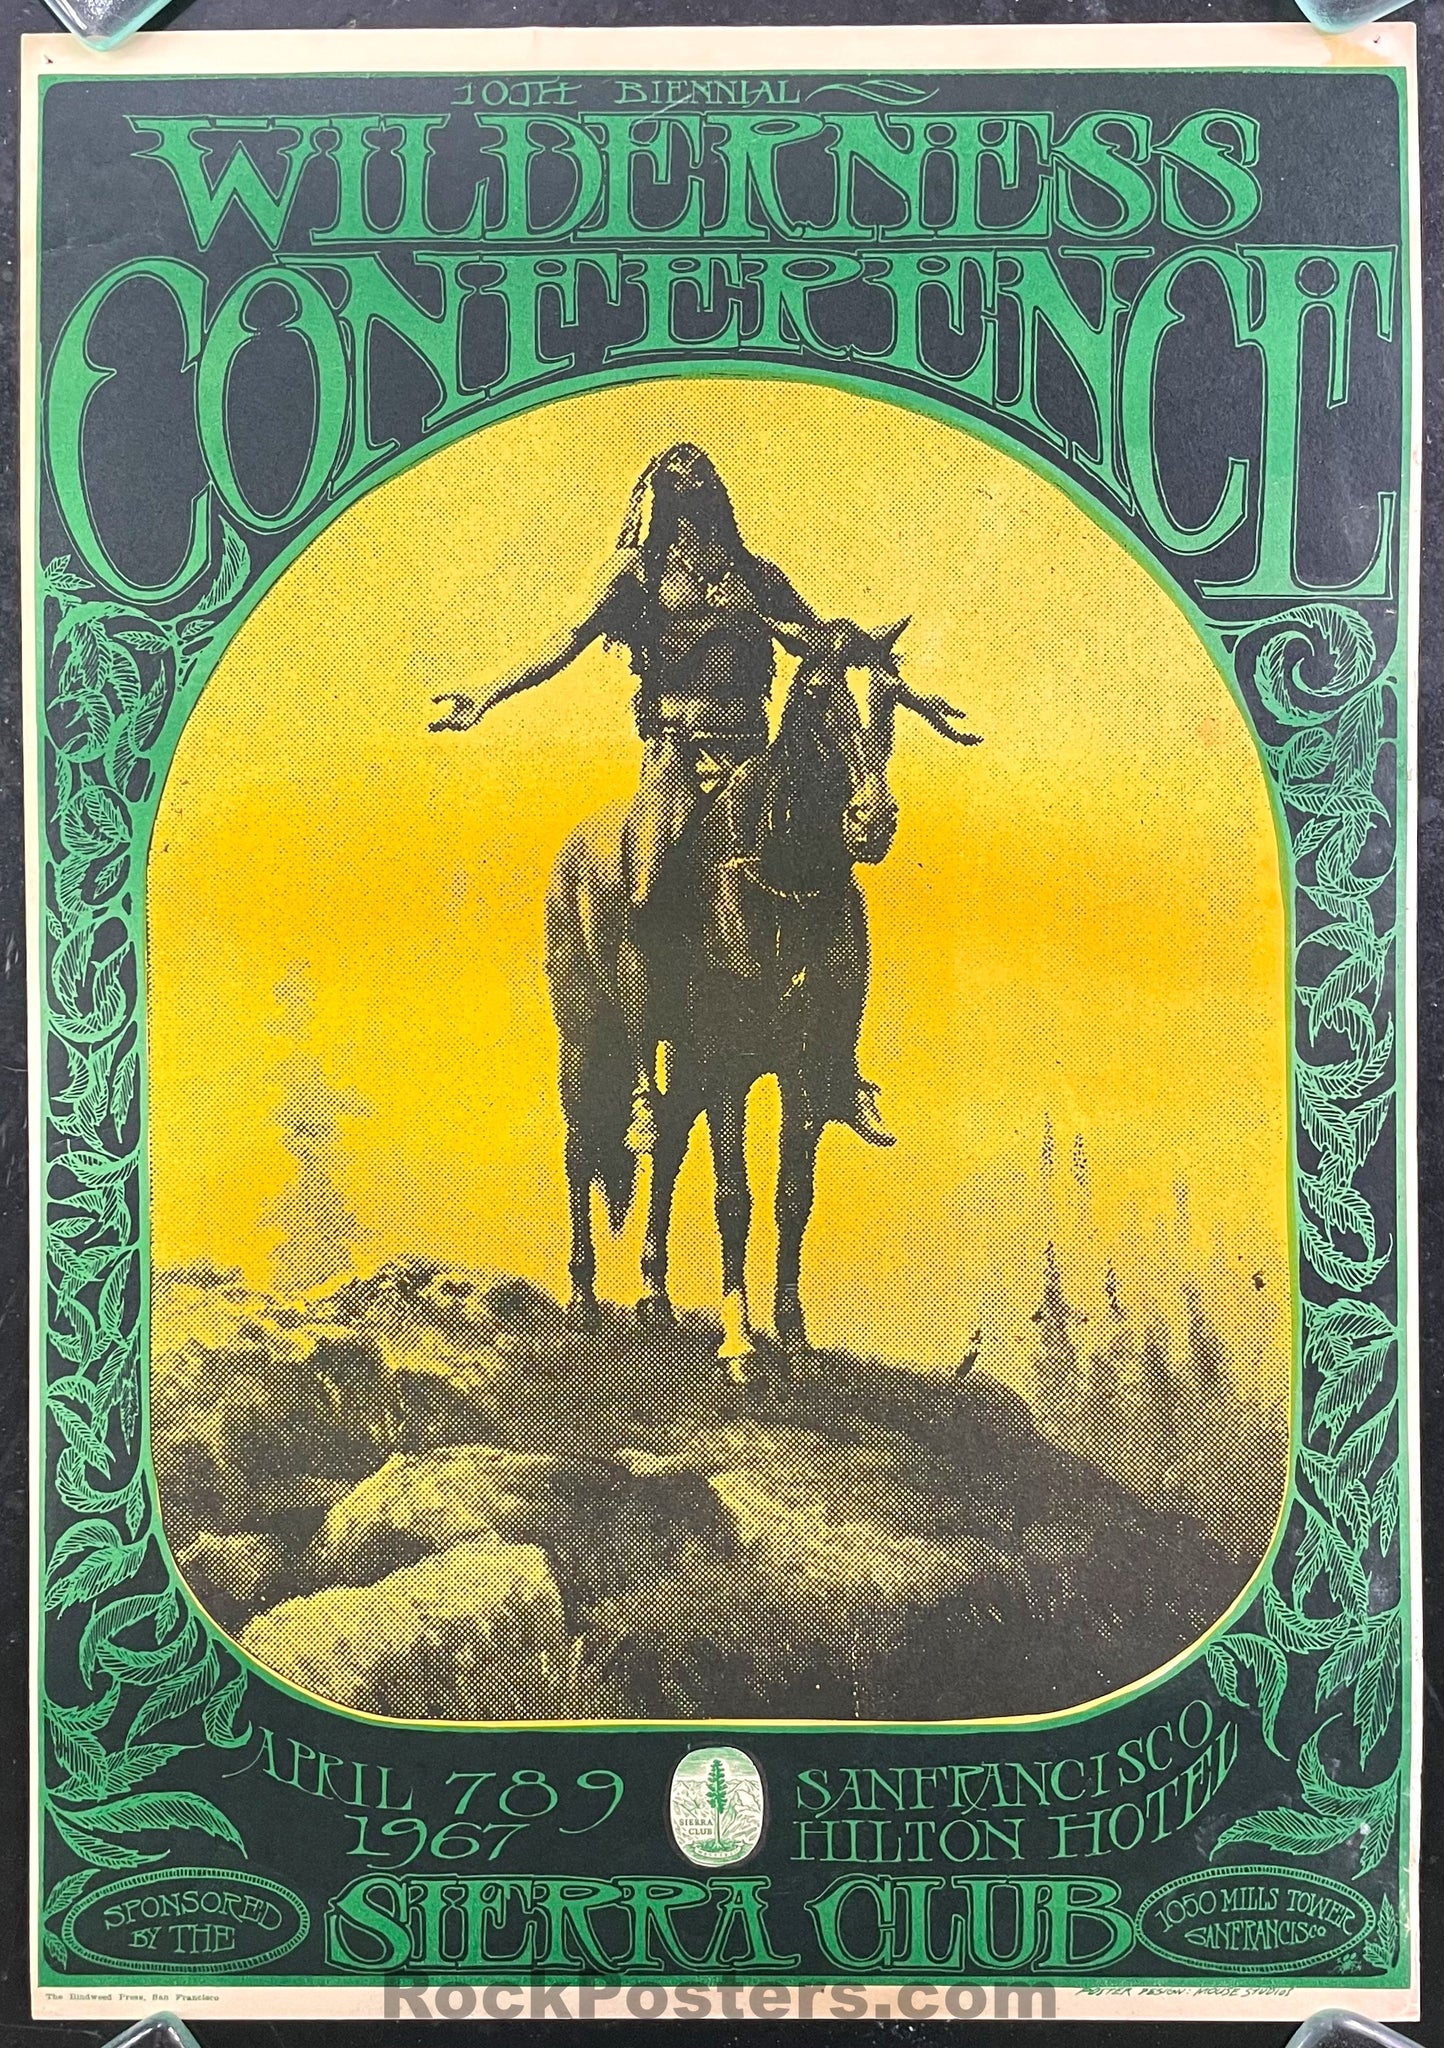 AUCTION - AOR 2.265 - Wilderness Conference - Sierra Club - 1967 Poster - Excellent